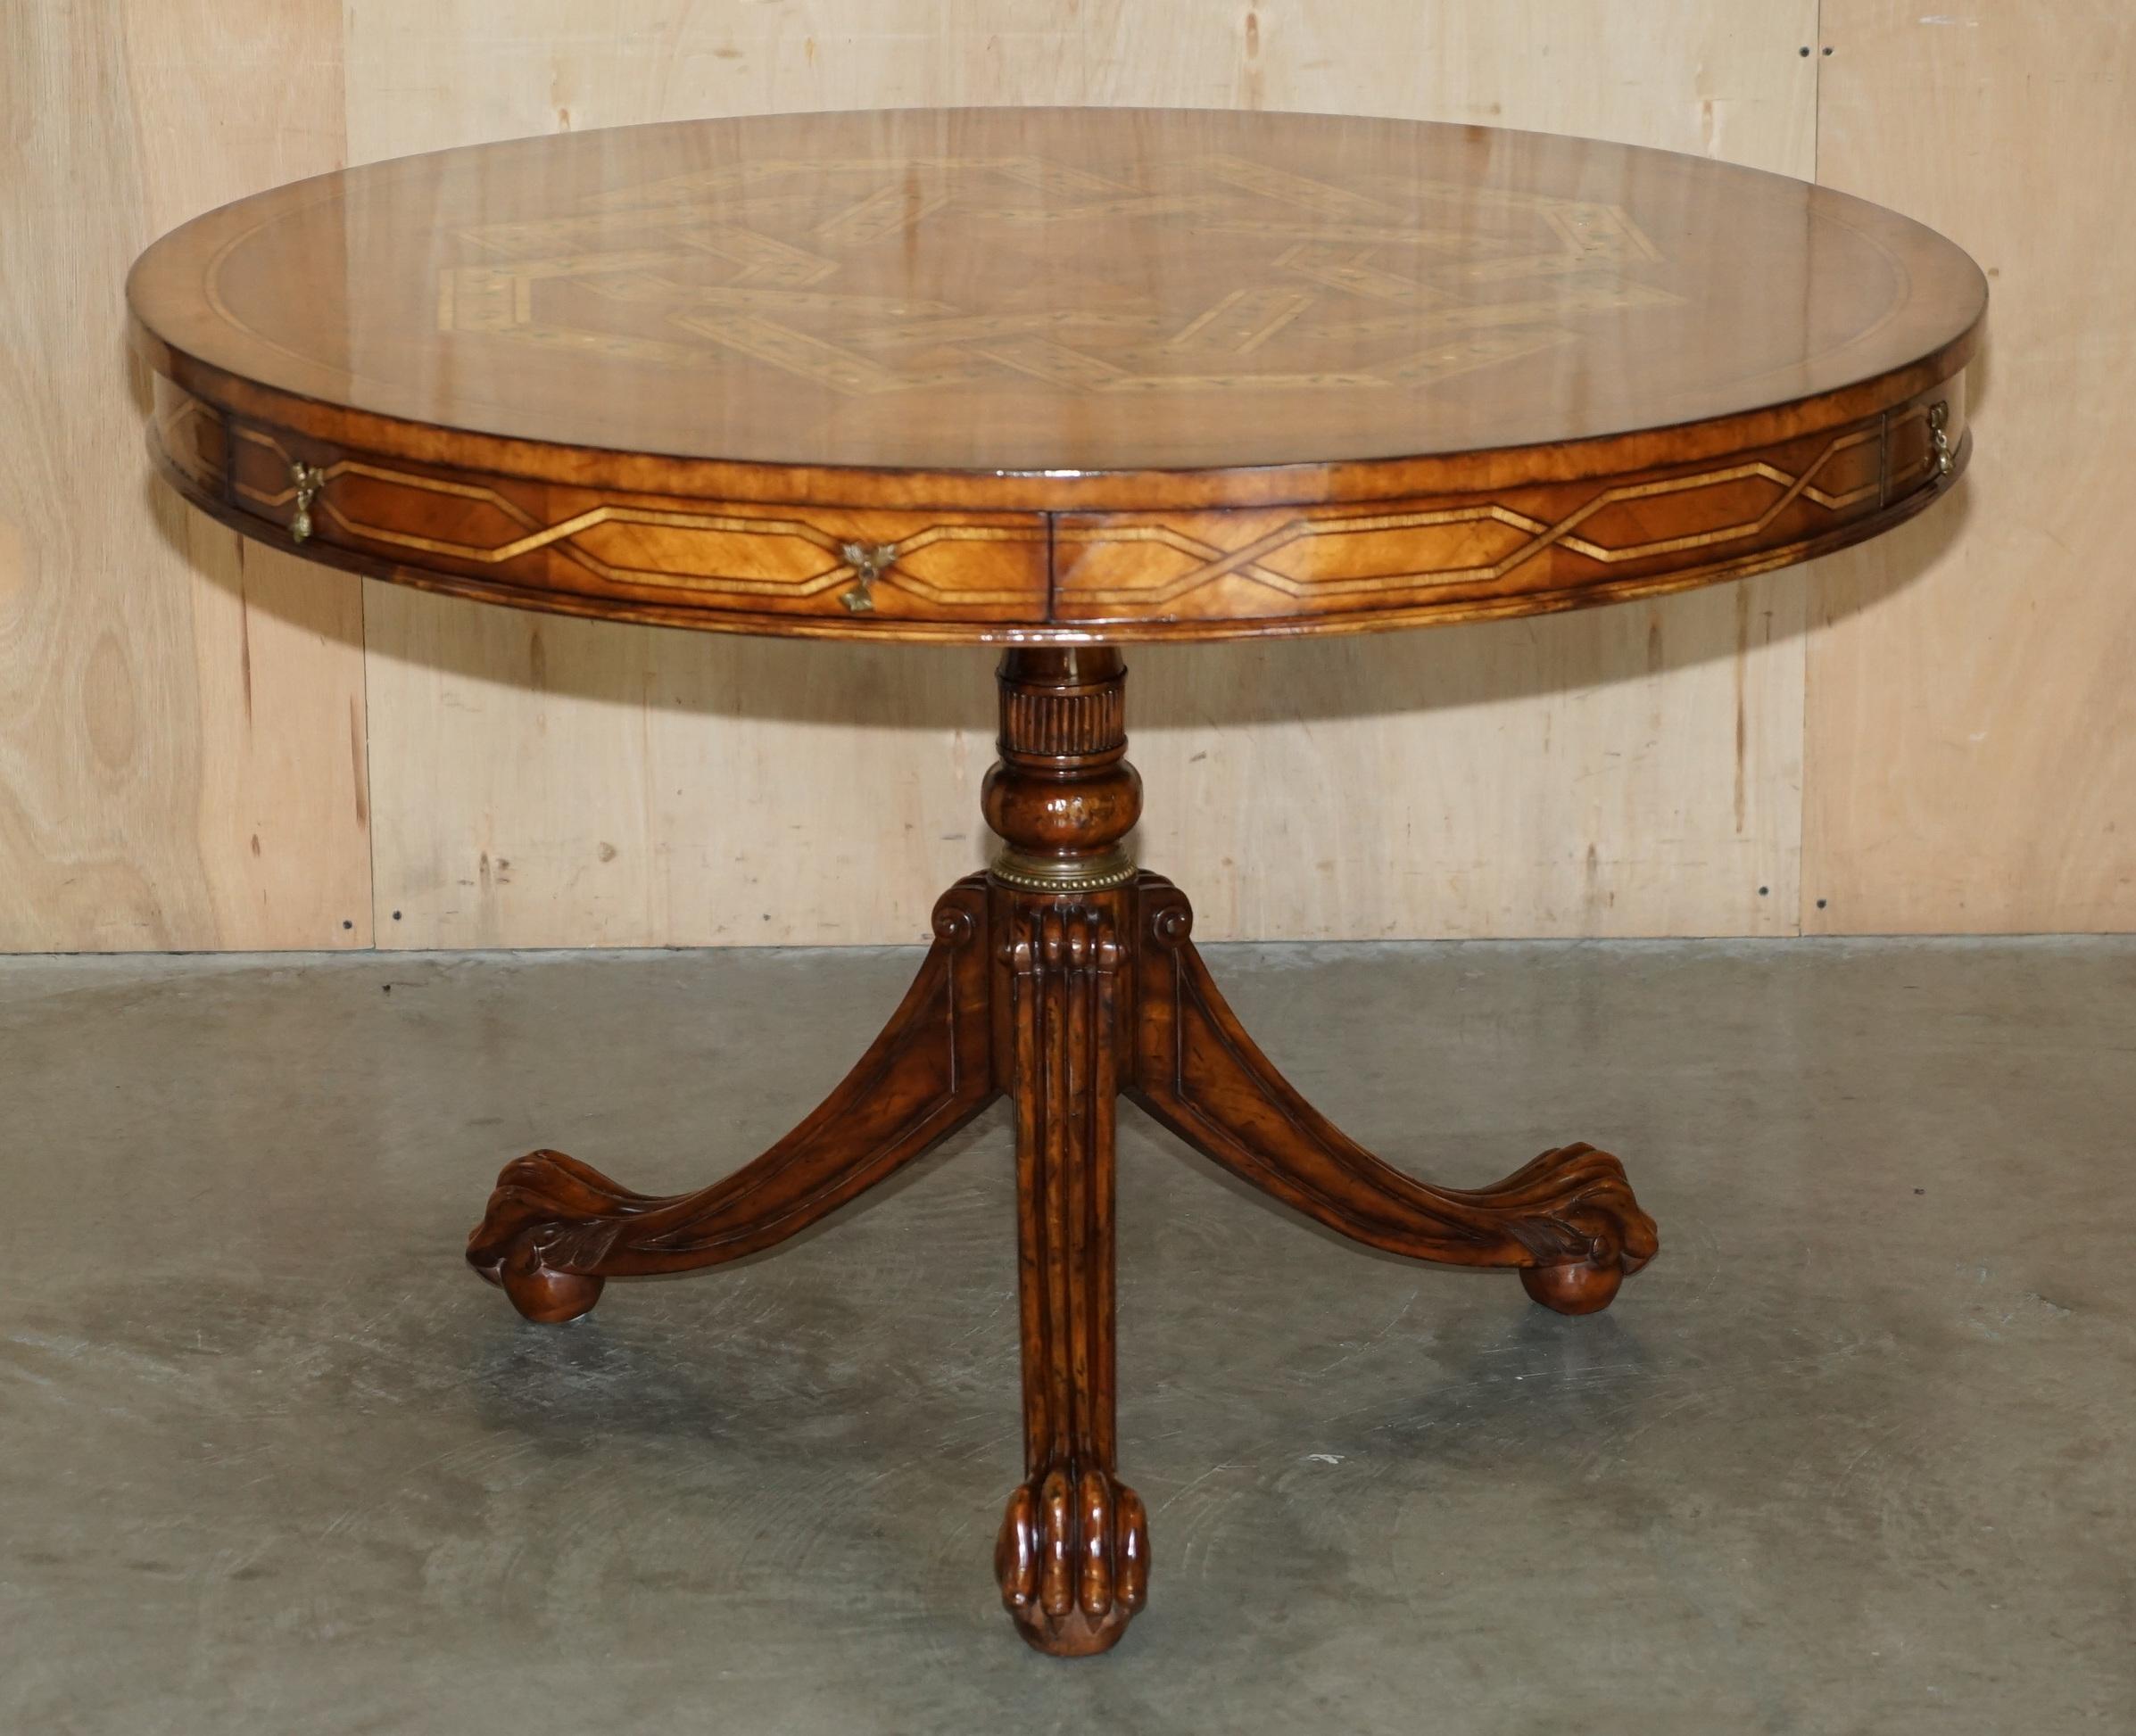 Royal House Antiques

Royal House Antiques is delighted to offer for sale this exquisitely designed, hand made in England occasional dining table with Celtic design top and three George Hepplewhite style Wheatgrass chairs in Burr Oak, Walnut and